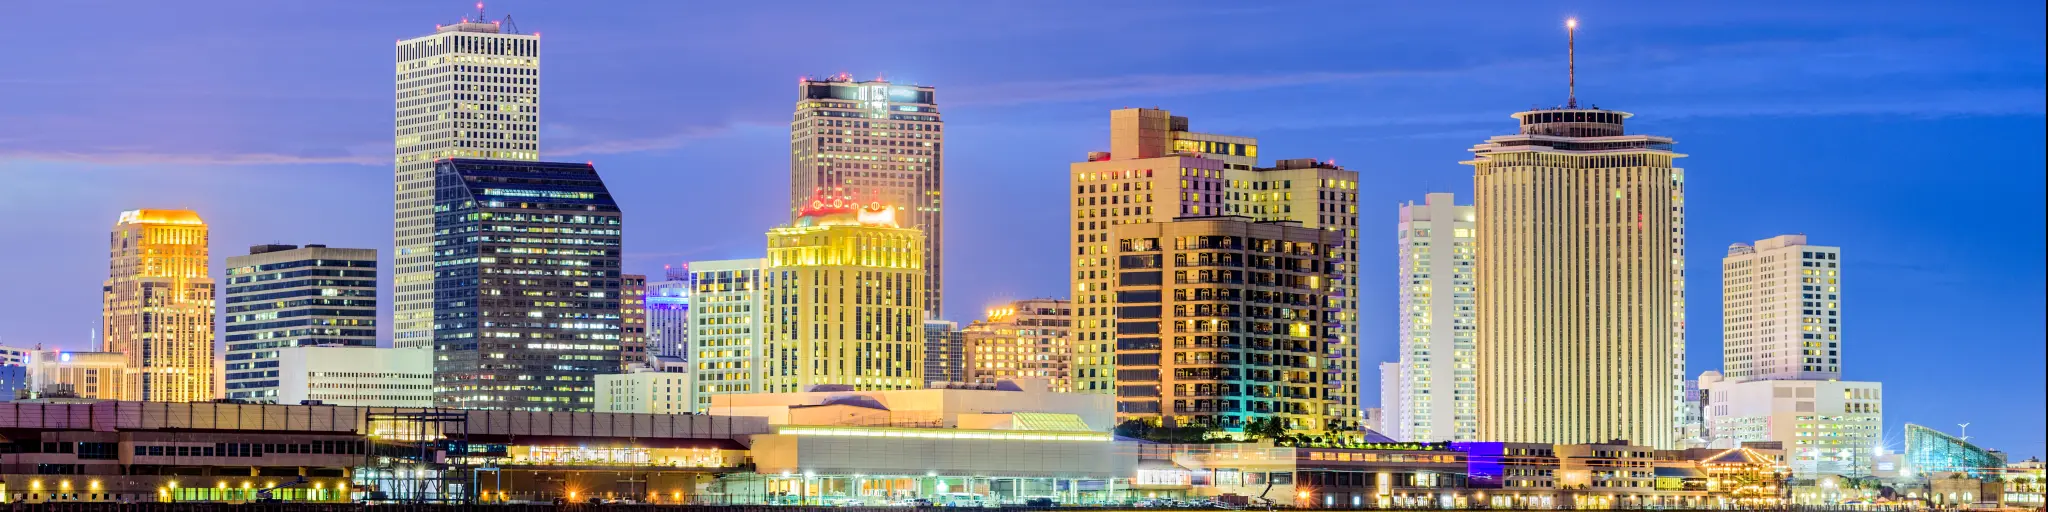 A view of the New Orleans skyline